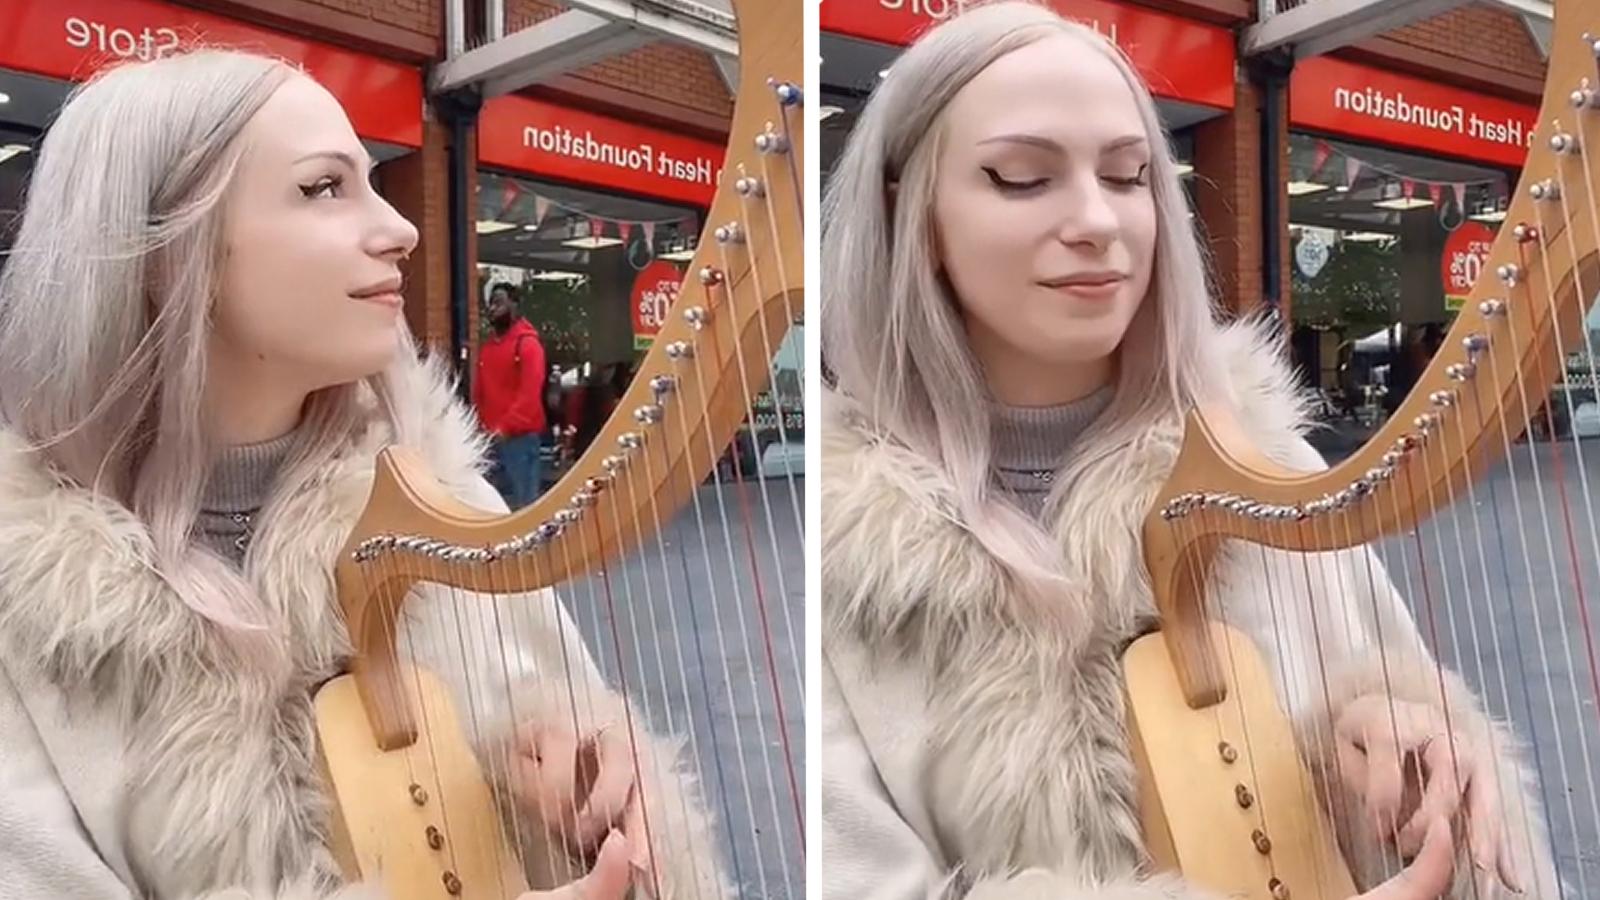 Robyn Hearts busking with her harp.